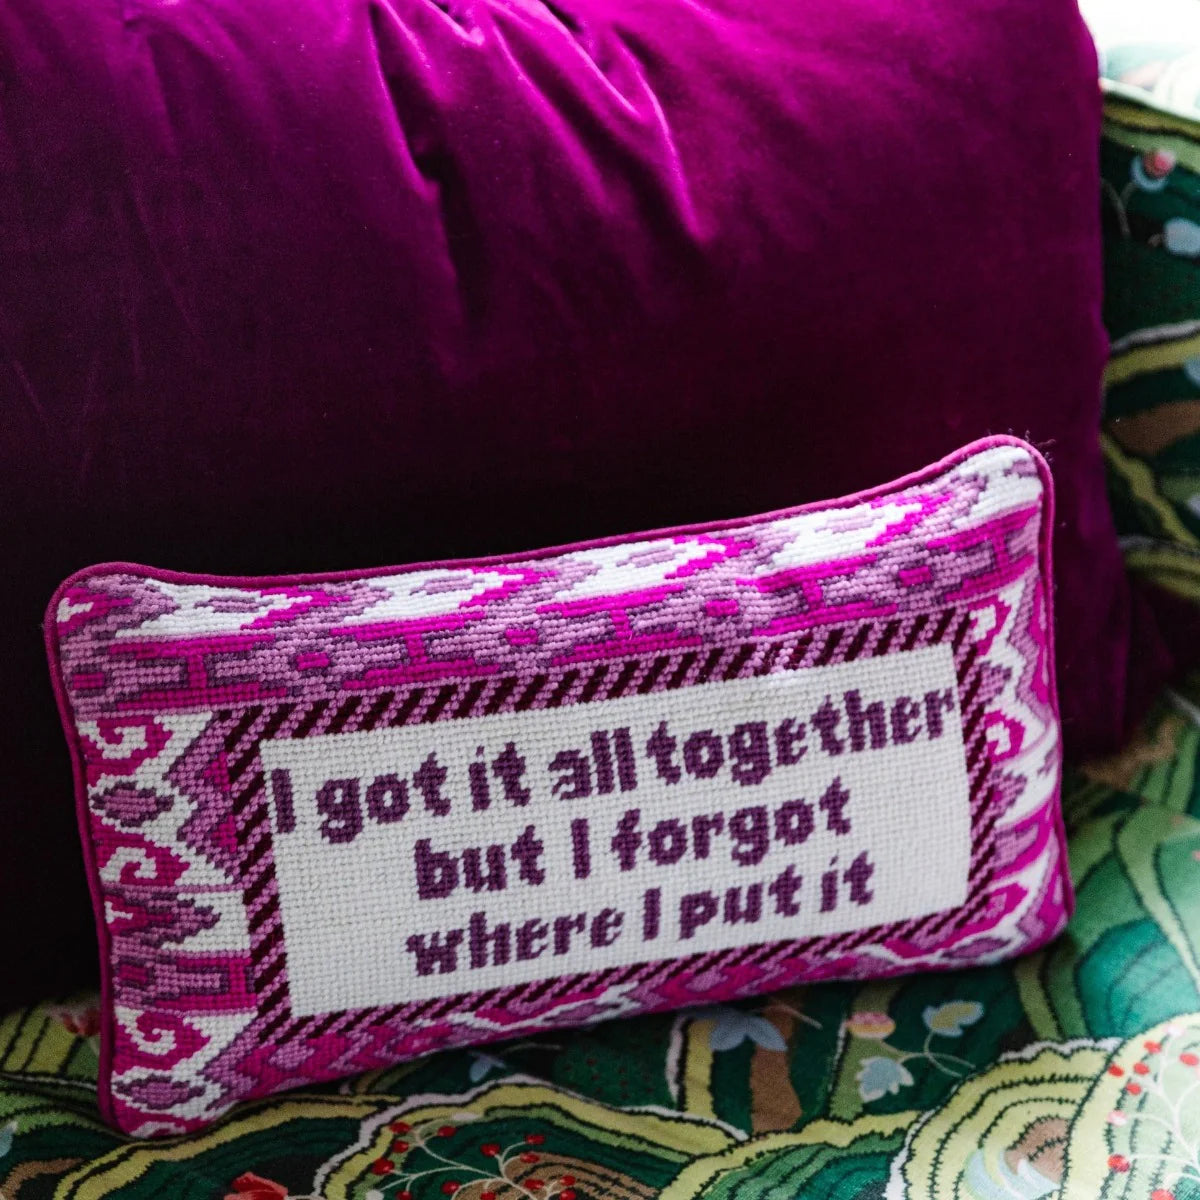 Got It All Together Needlepoint Pillow